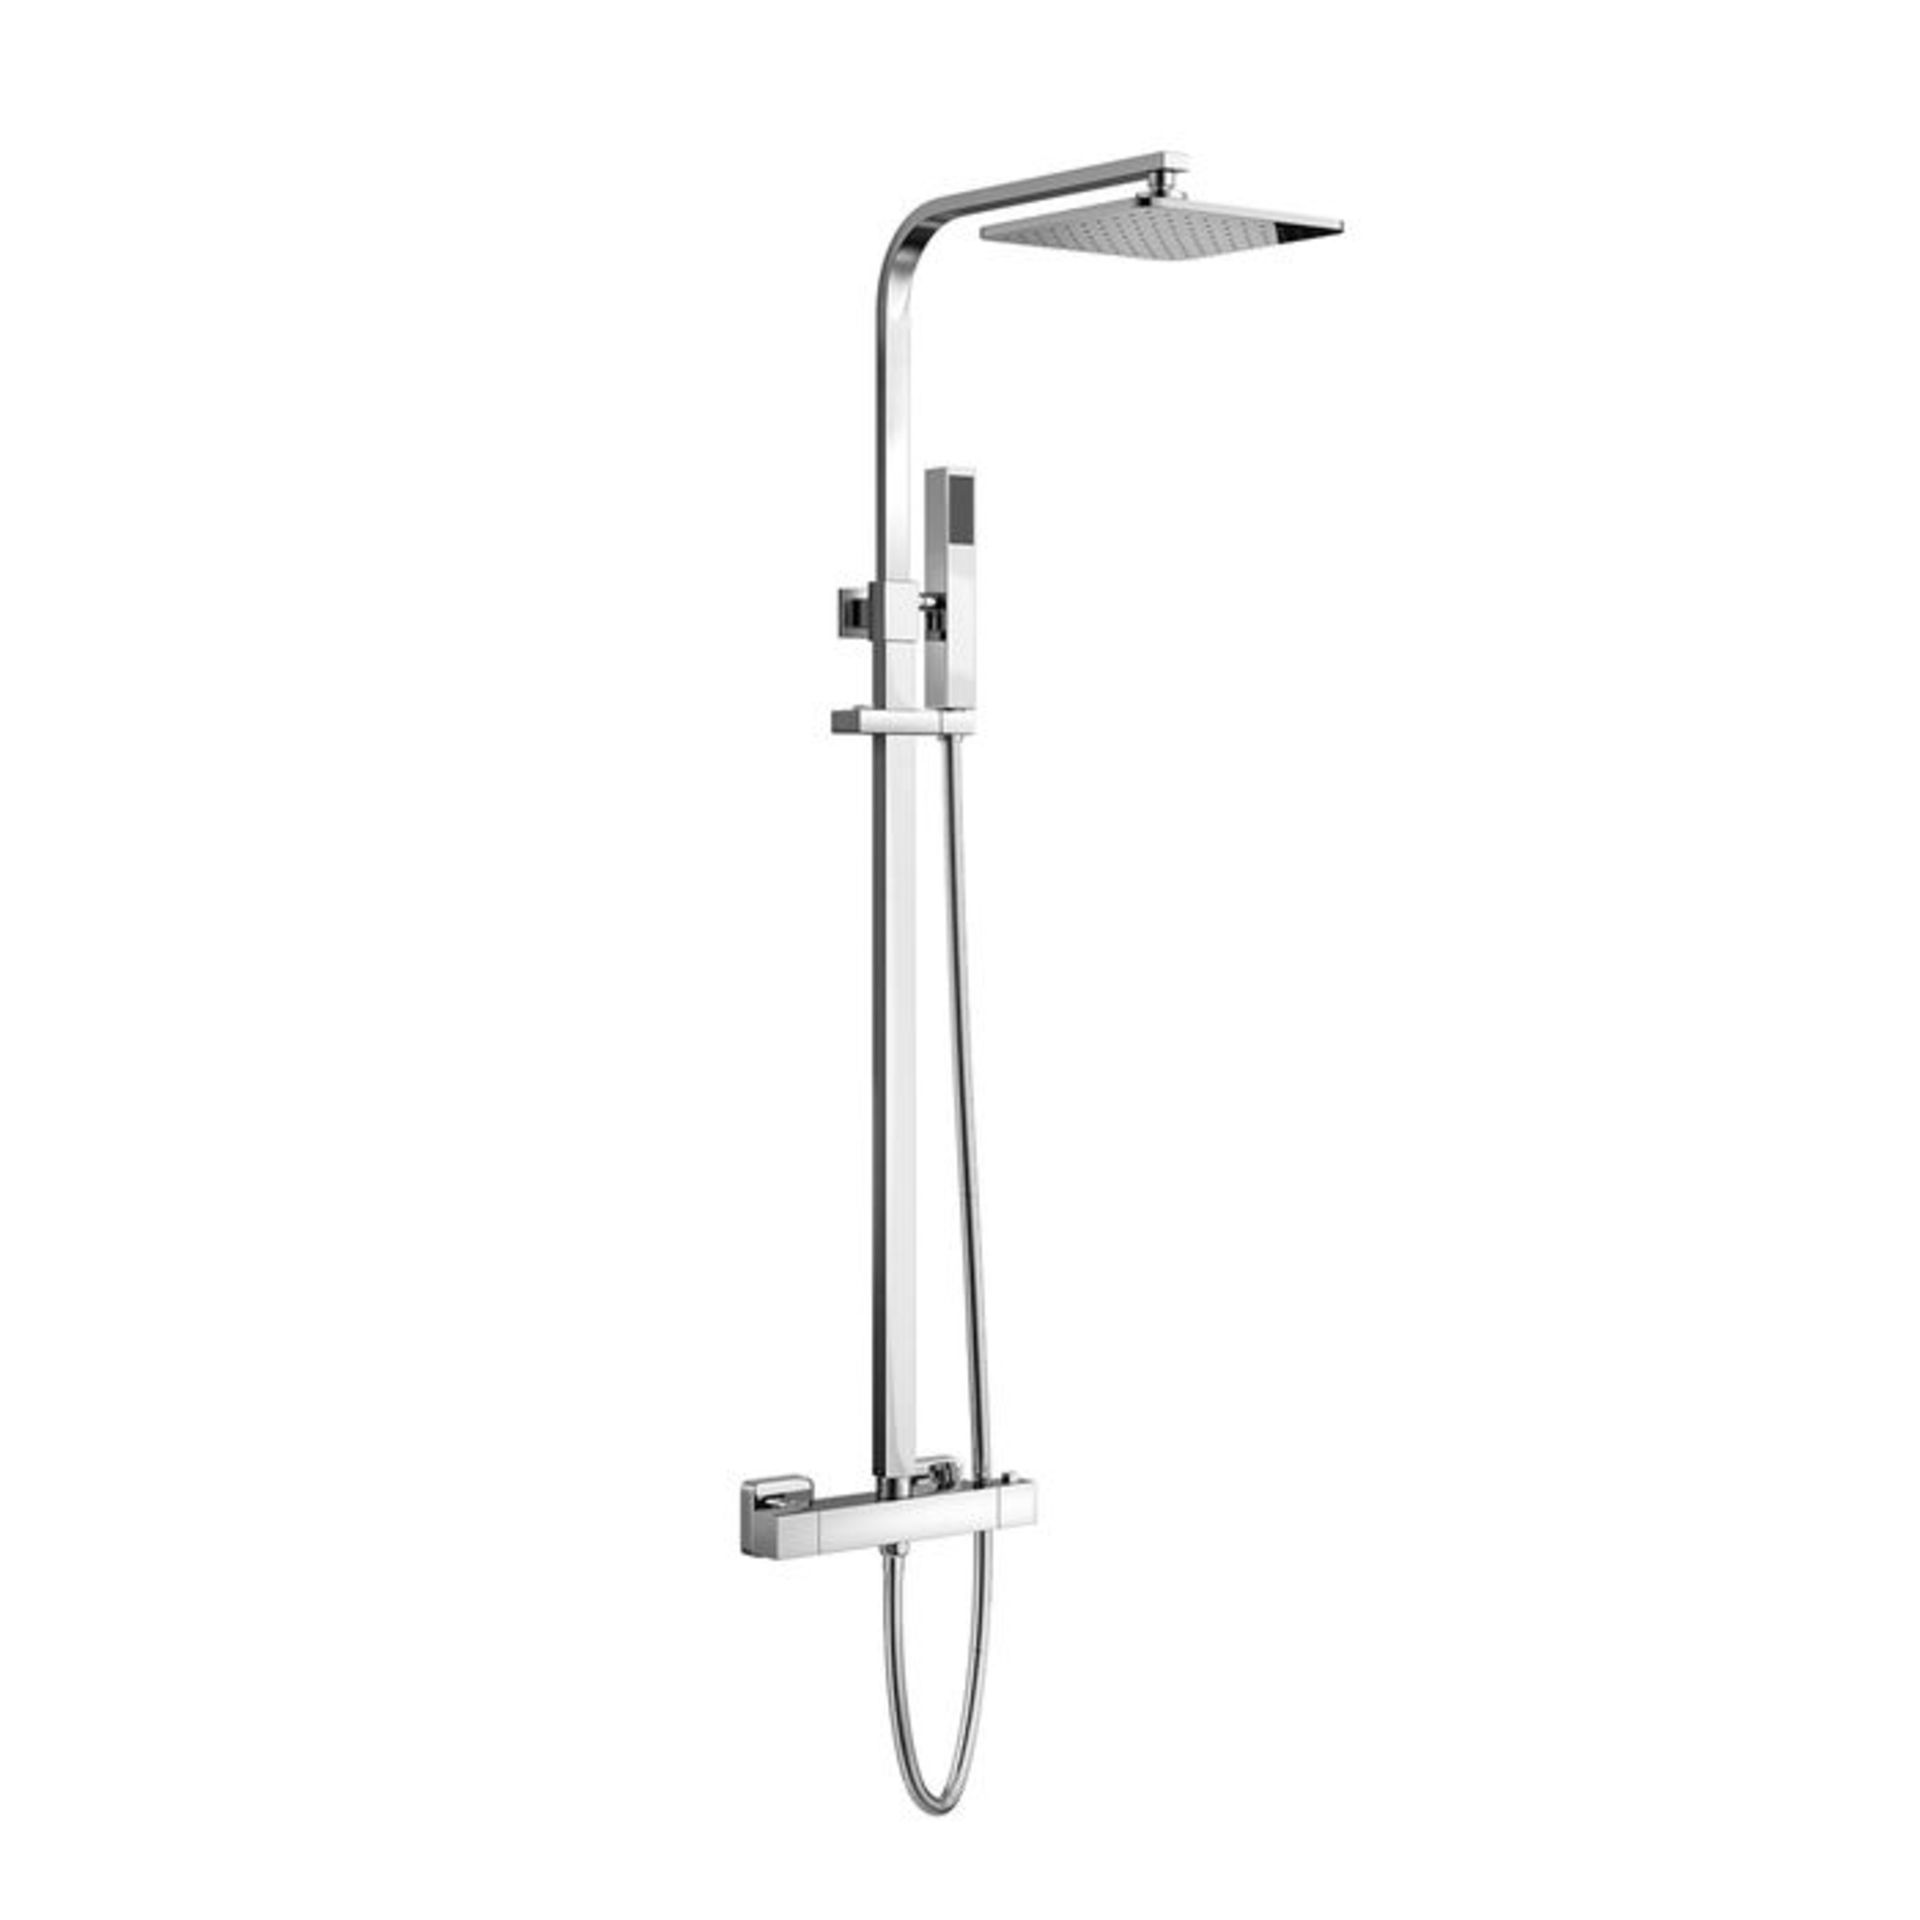 (KL38) Square Exposed Thermostatic Shower Kit & Medium Head- Harper. Angled, slim and on-trend - Image 2 of 3